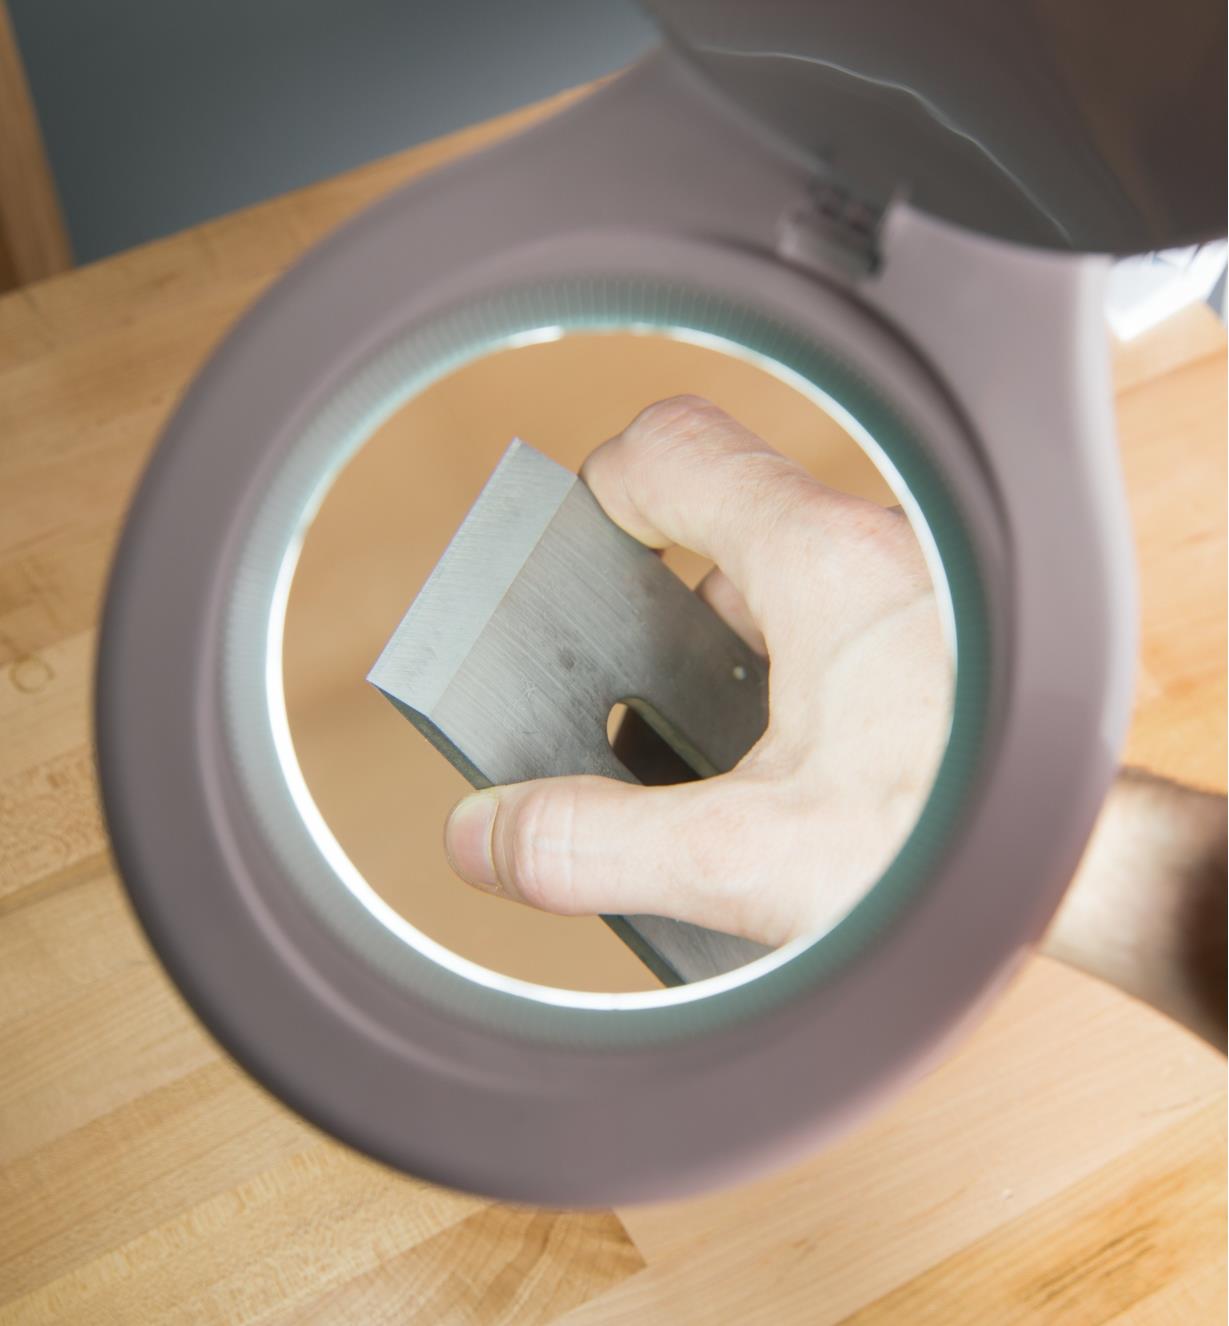 Close-up view of the lamp magnifying a plane blade